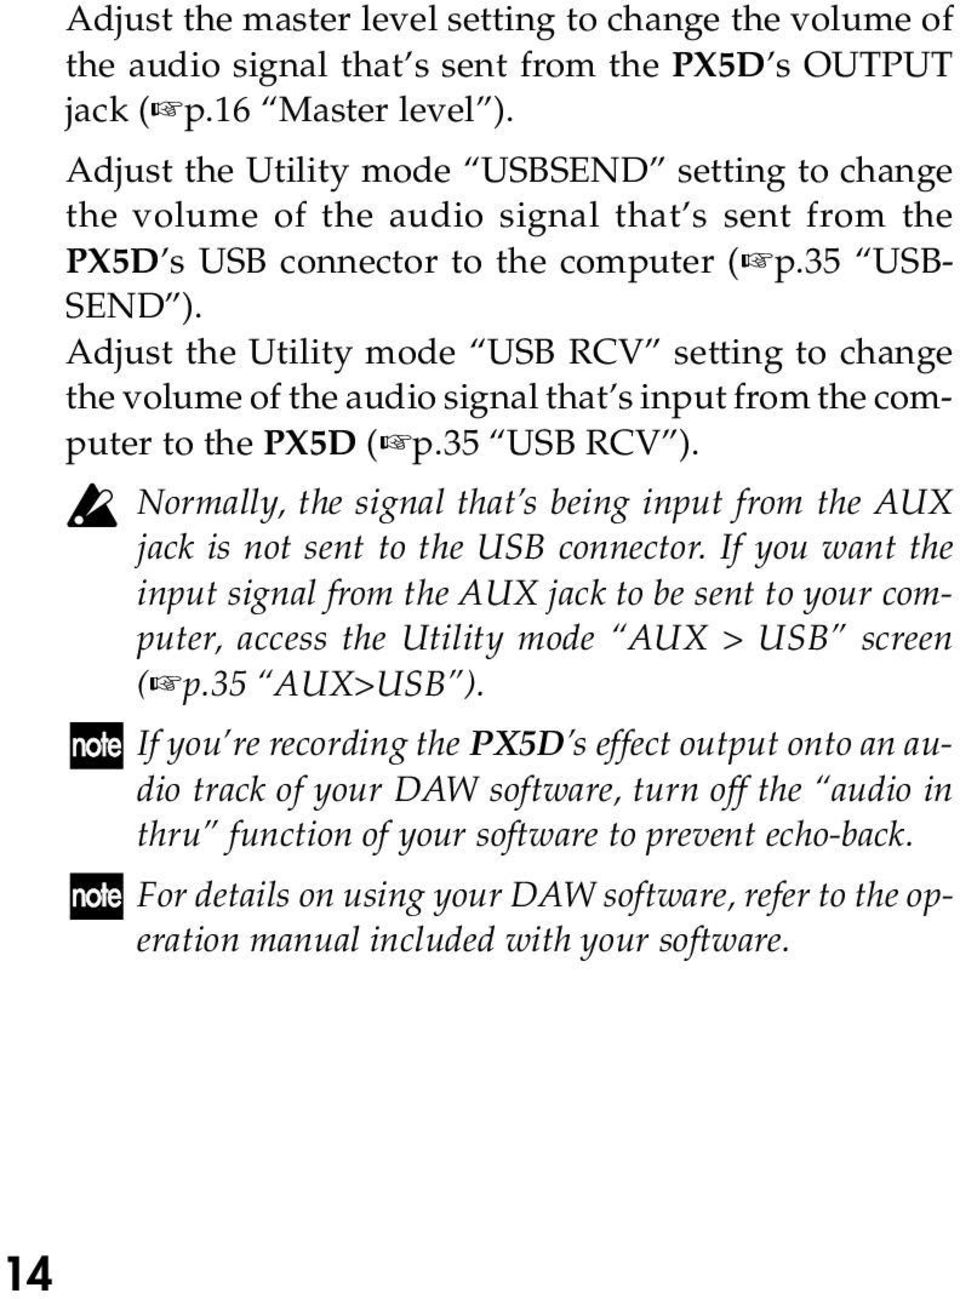 Adjust the Utility mode USB RCV setting to change the volume of the audio signal that s input from the computer to the PX5D ( p.35 USB RCV ).